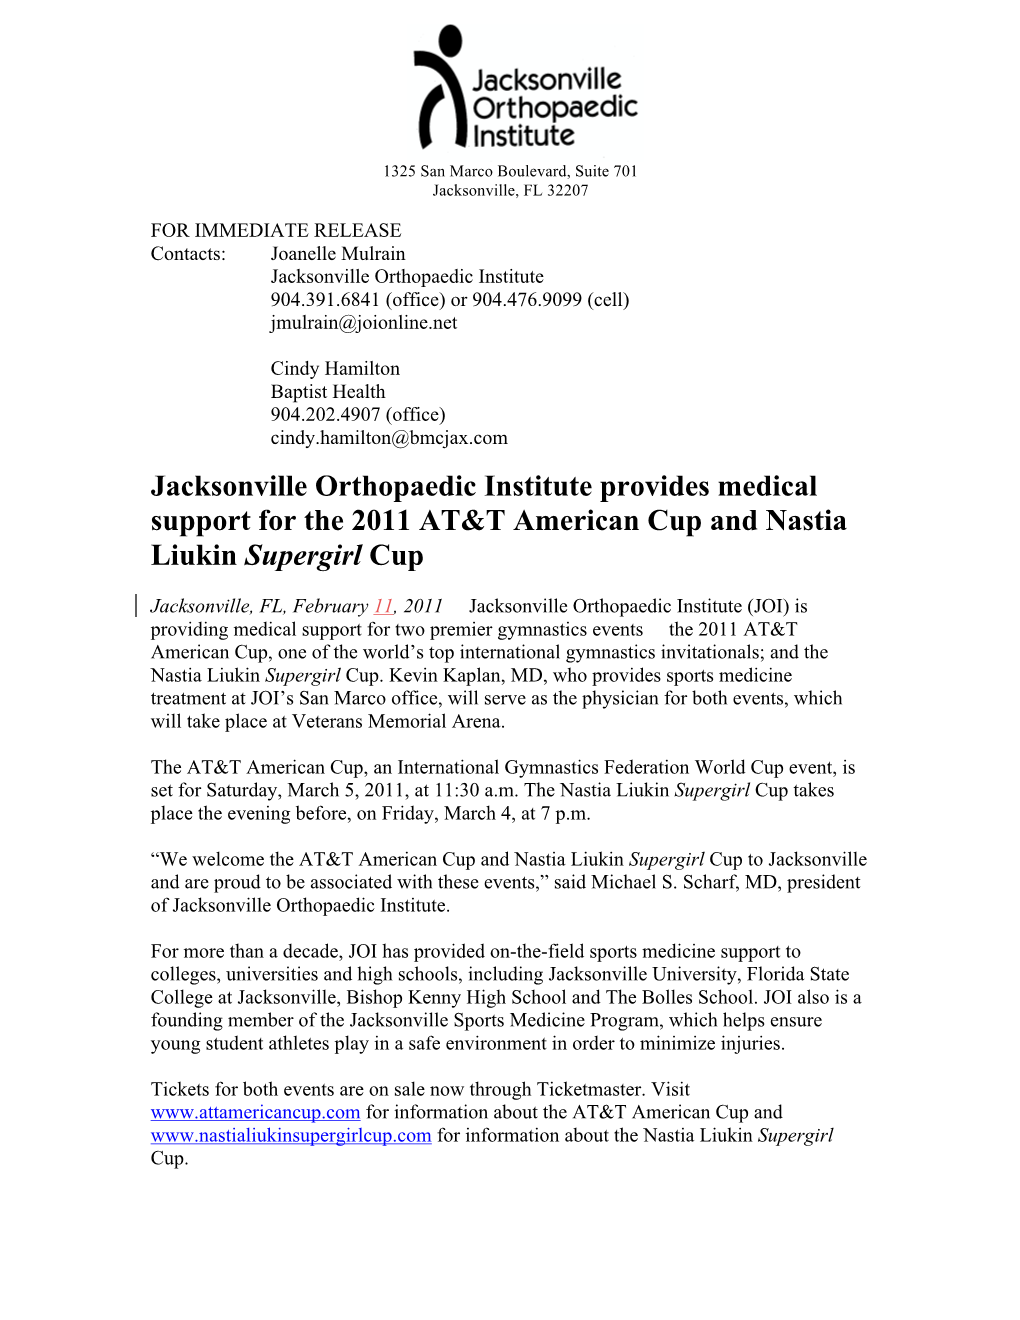 Jacksonville Orthopaedic Institute Provides Medical Support for the 2011 AT&T American Cup and Nastia Liukin Supergirl Cup